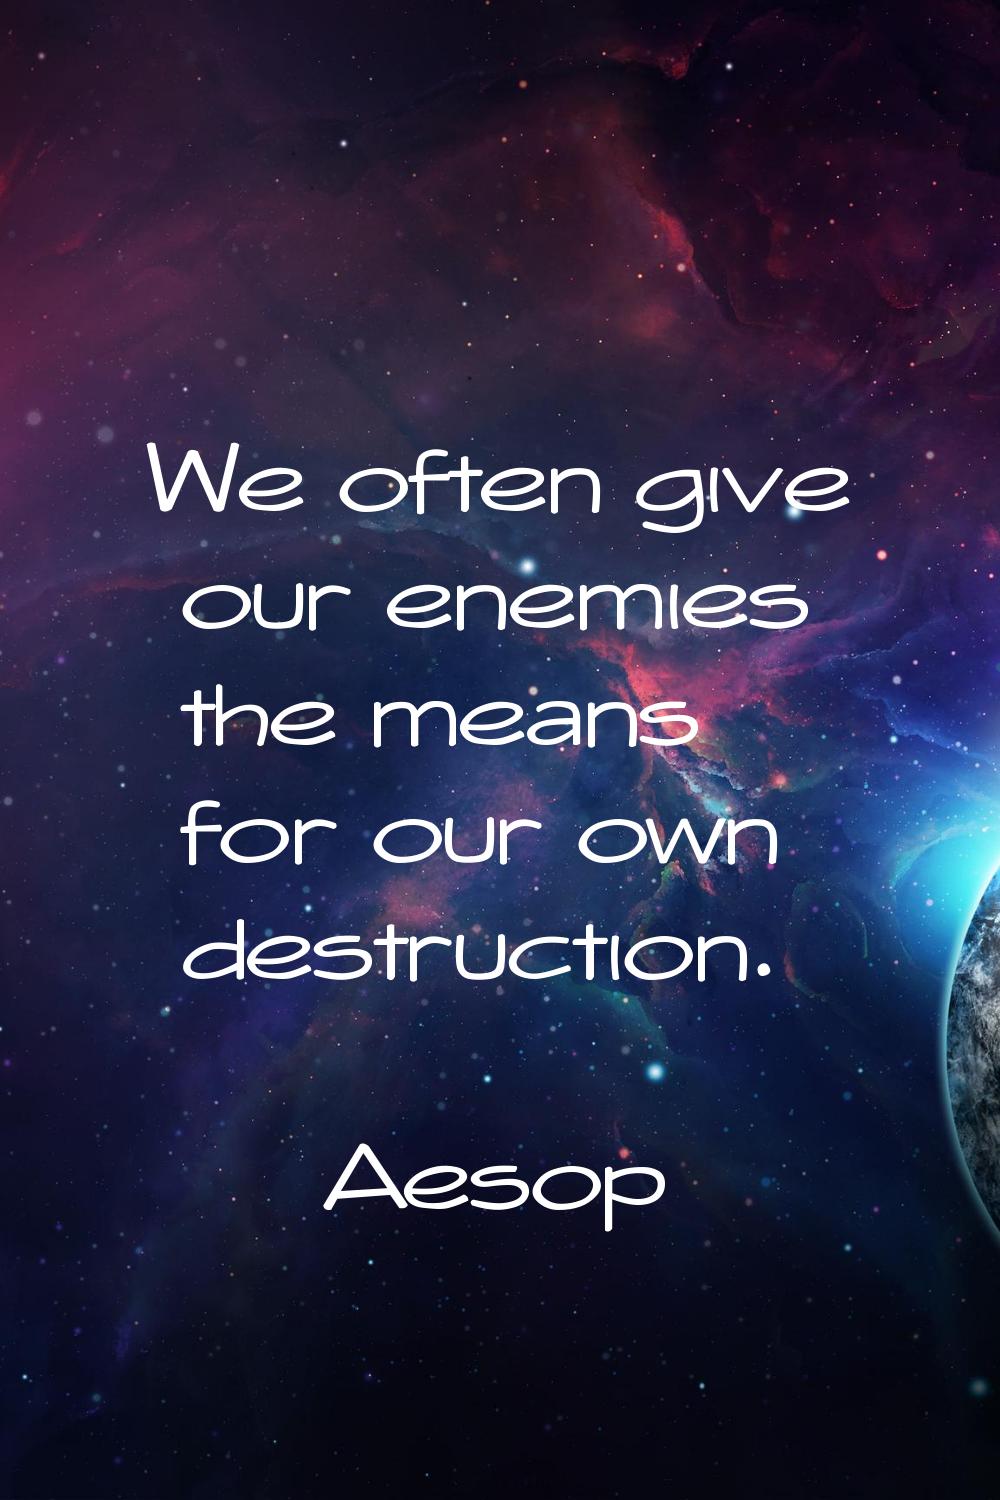 We often give our enemies the means for our own destruction.